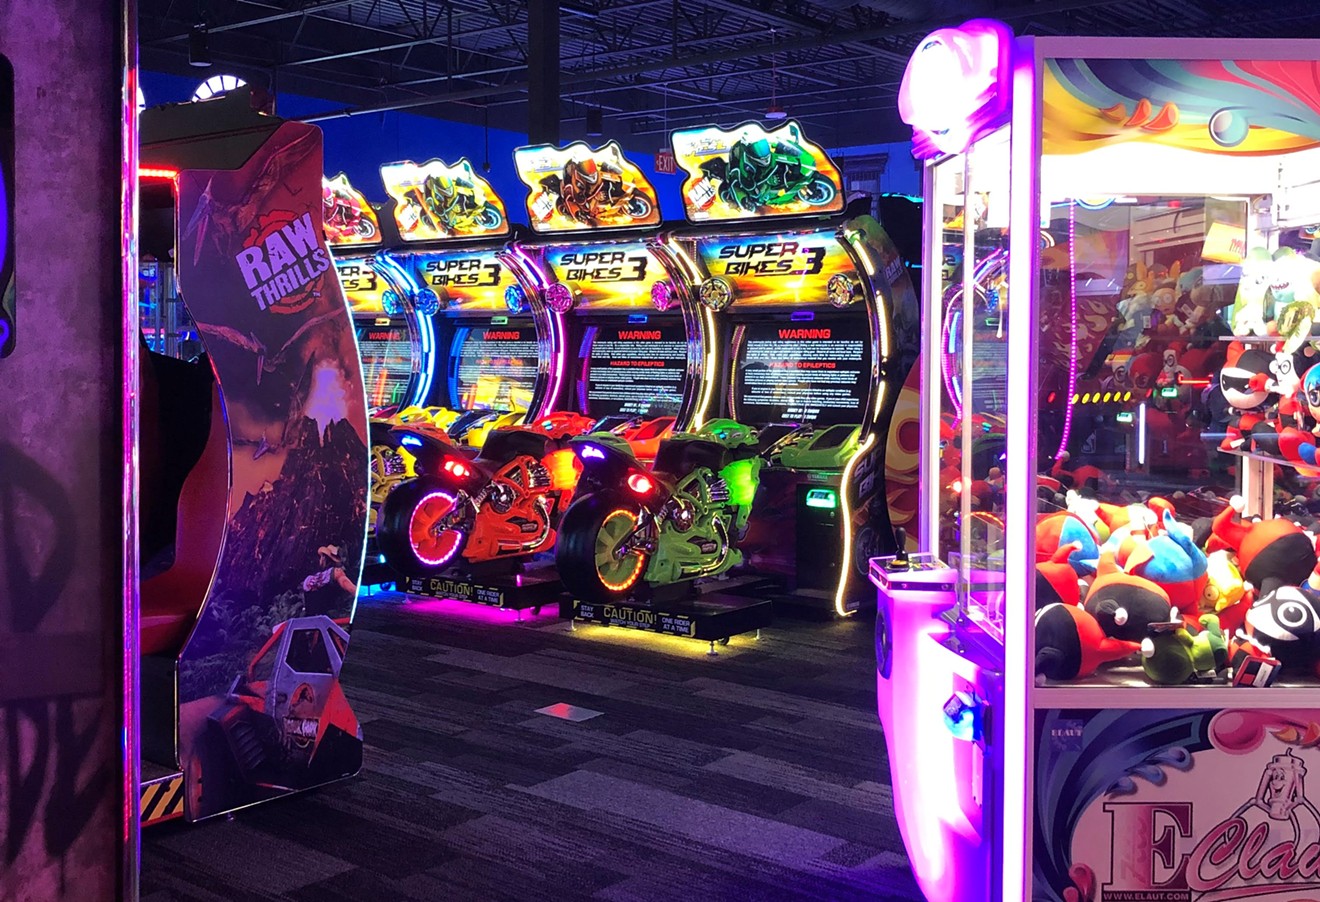 There's games for days at Mavrix in Scottsdale.